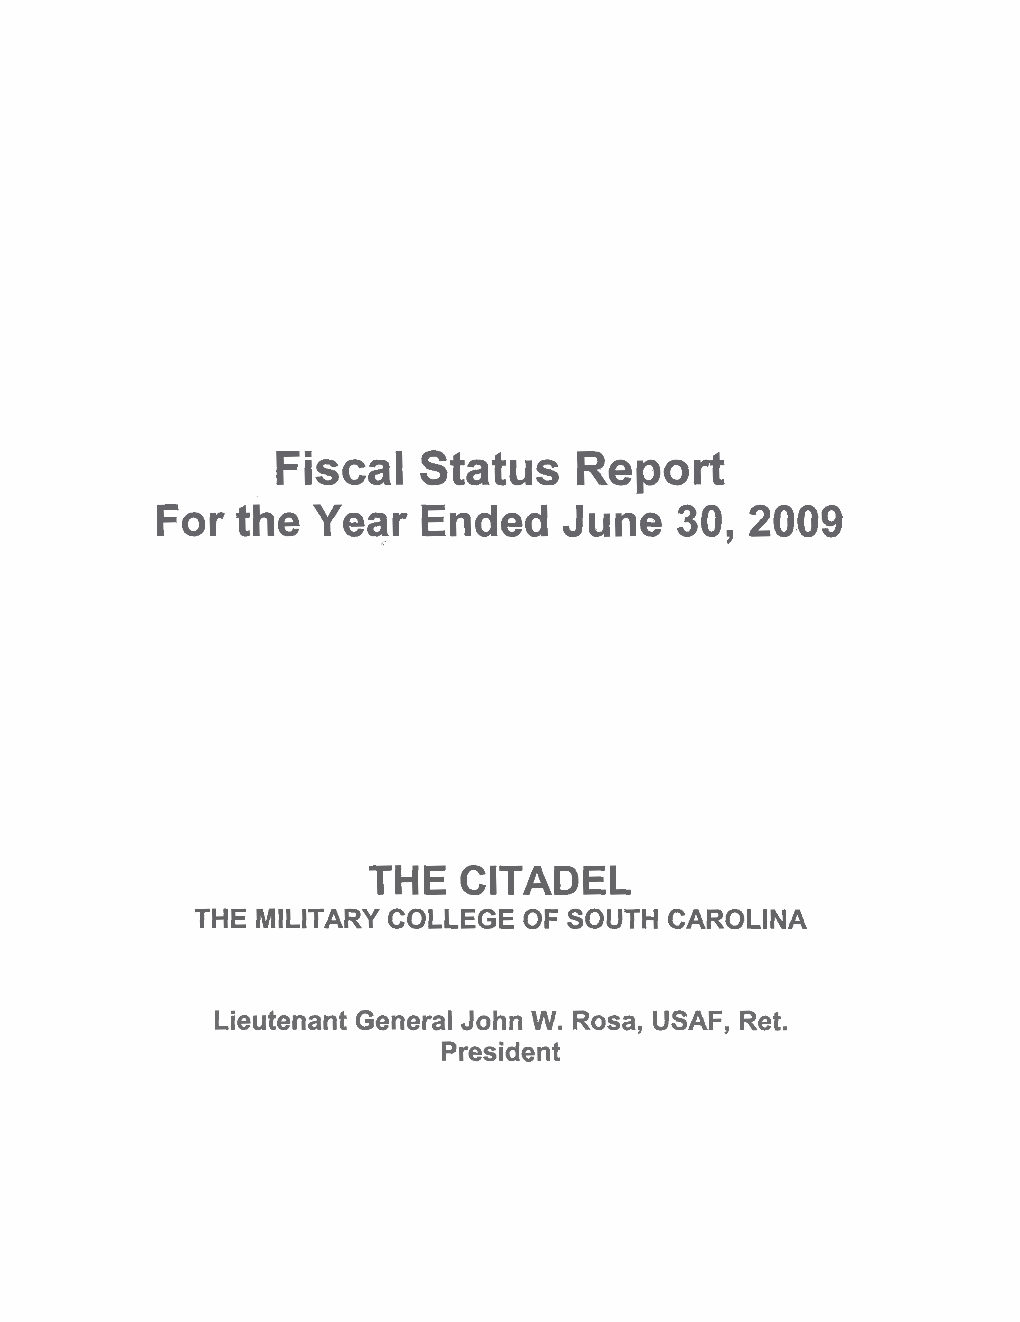 Fiscal Status Report for the Year Ended June 30,2009